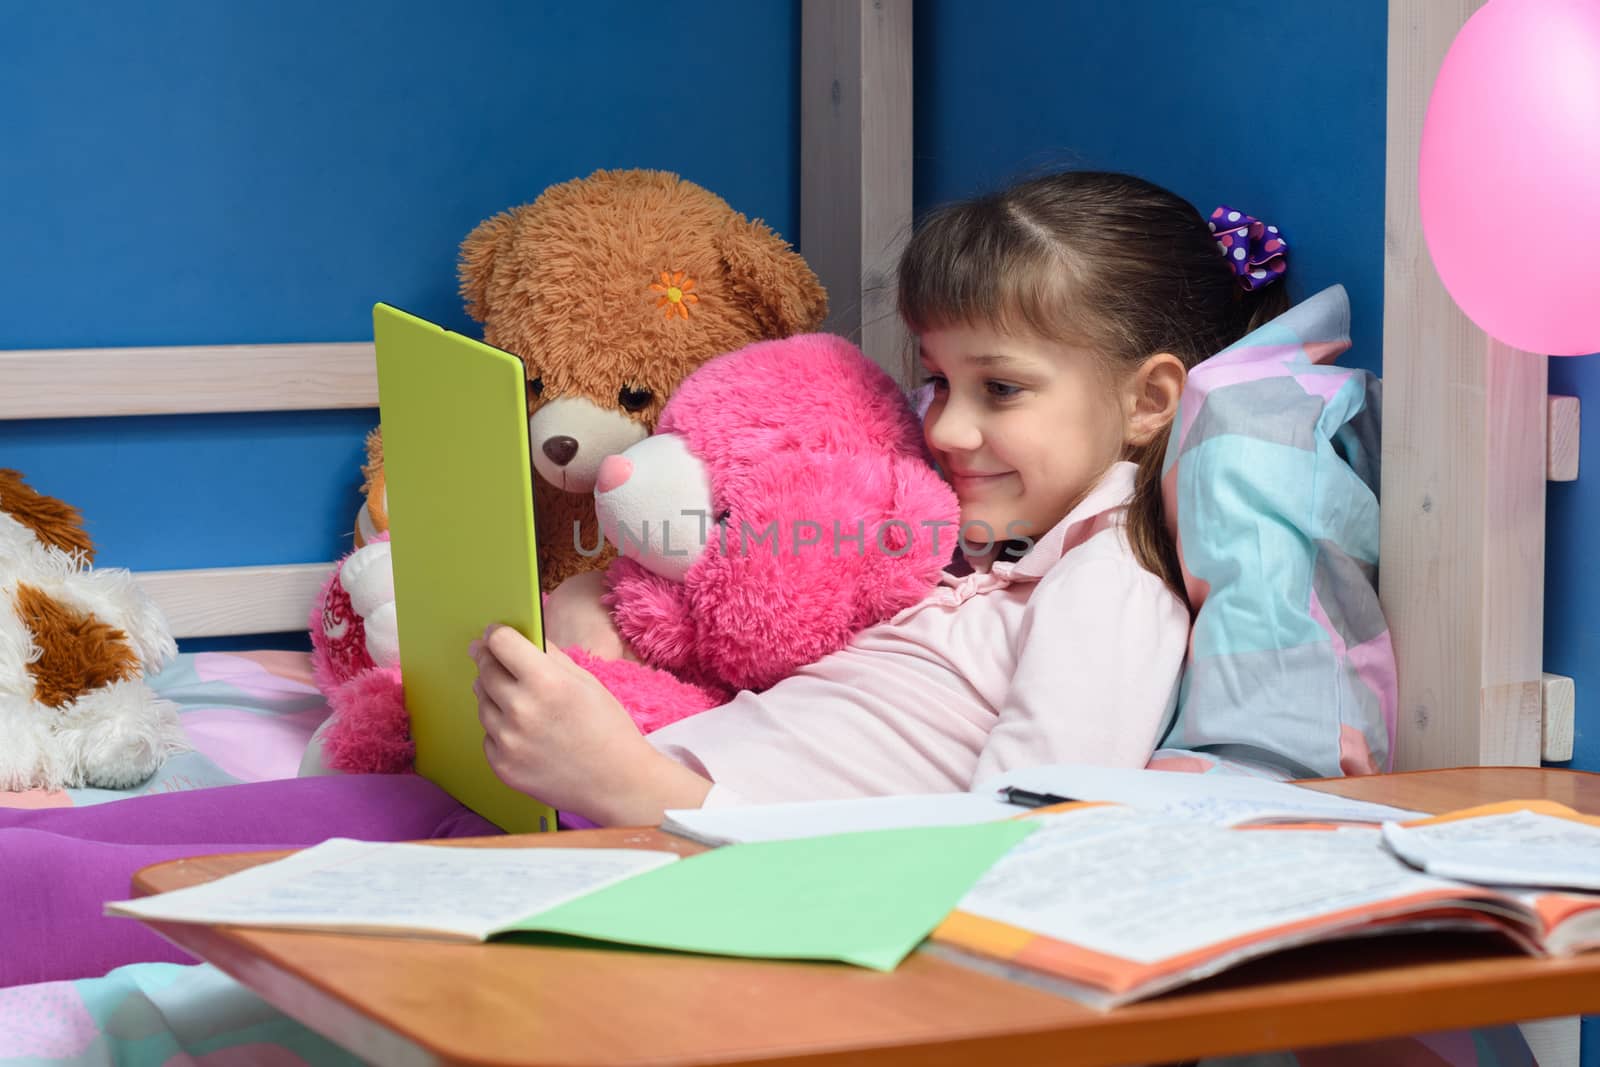 Nine-year-old girl lies on bed with toys and looks at tablet